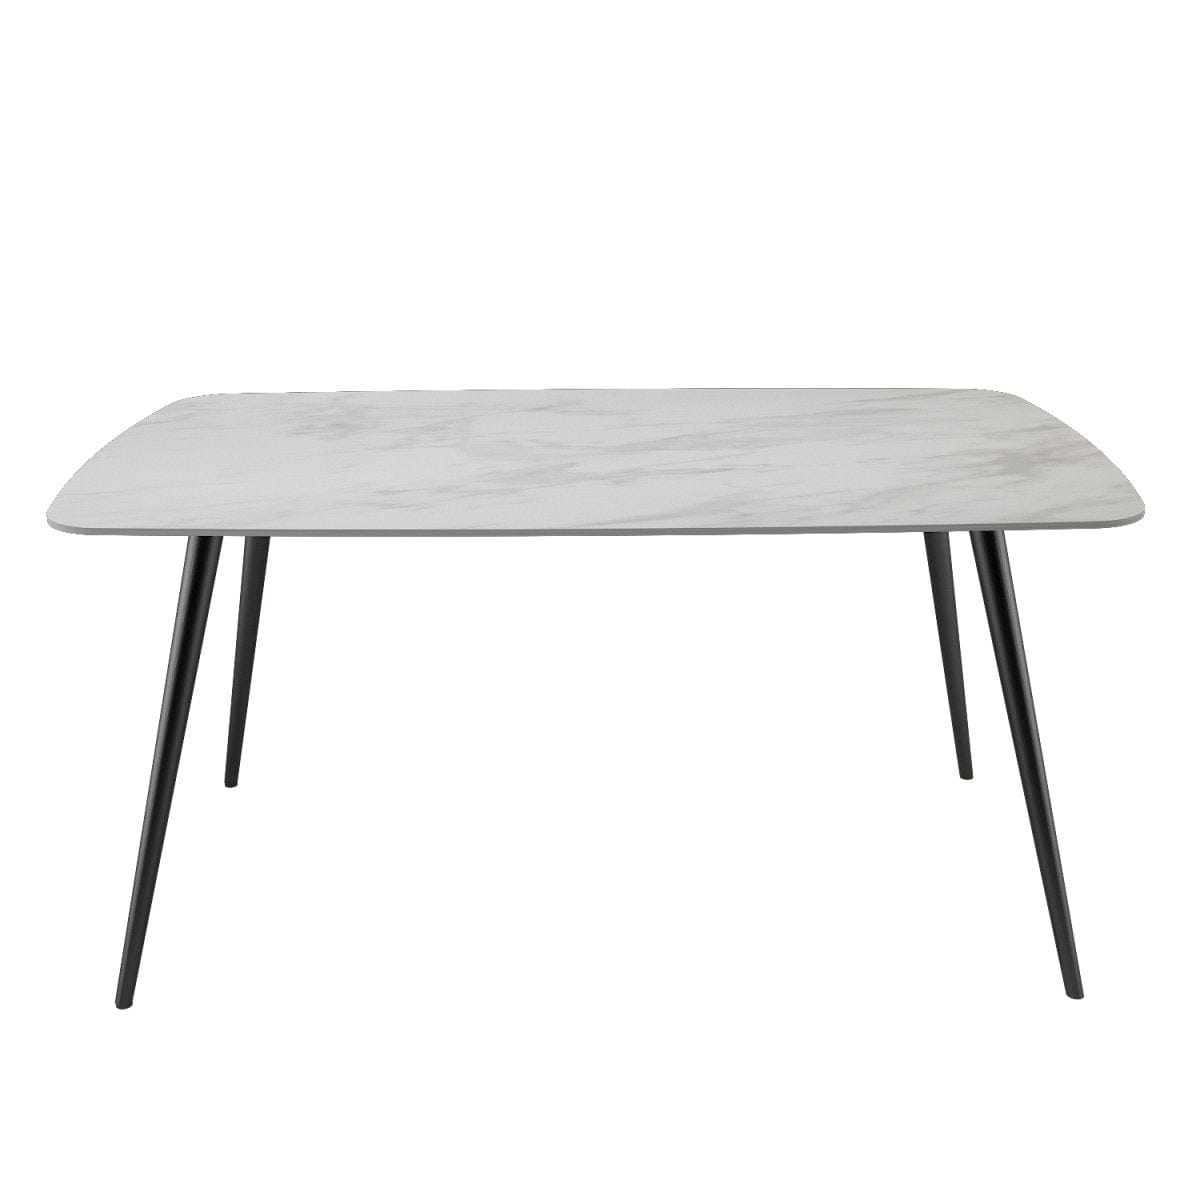 Gary 1.6m Sintered Stone Top Dining Table (DF003T) picket and rail